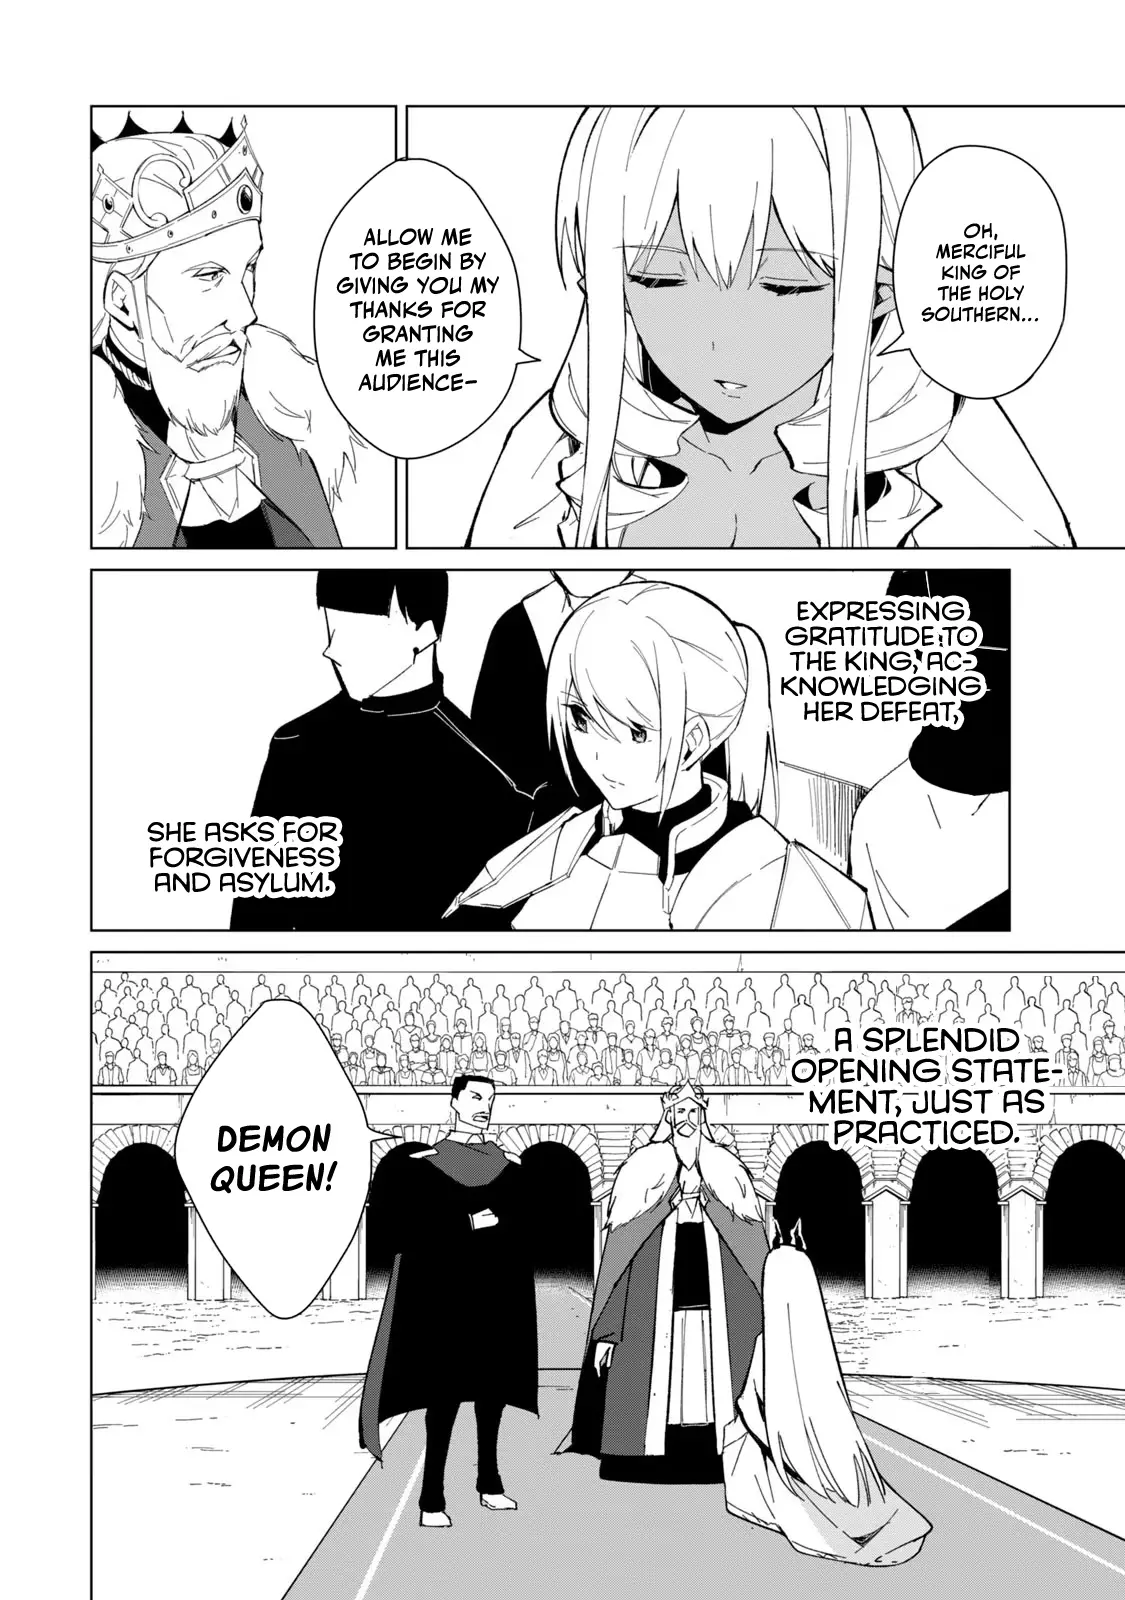 A Story About A Hero Exterminating A Dragon-Class Beautiful Girl Demon Queen, Who Has Very Low Self-Esteem, With Love! - chapter 24 - #3